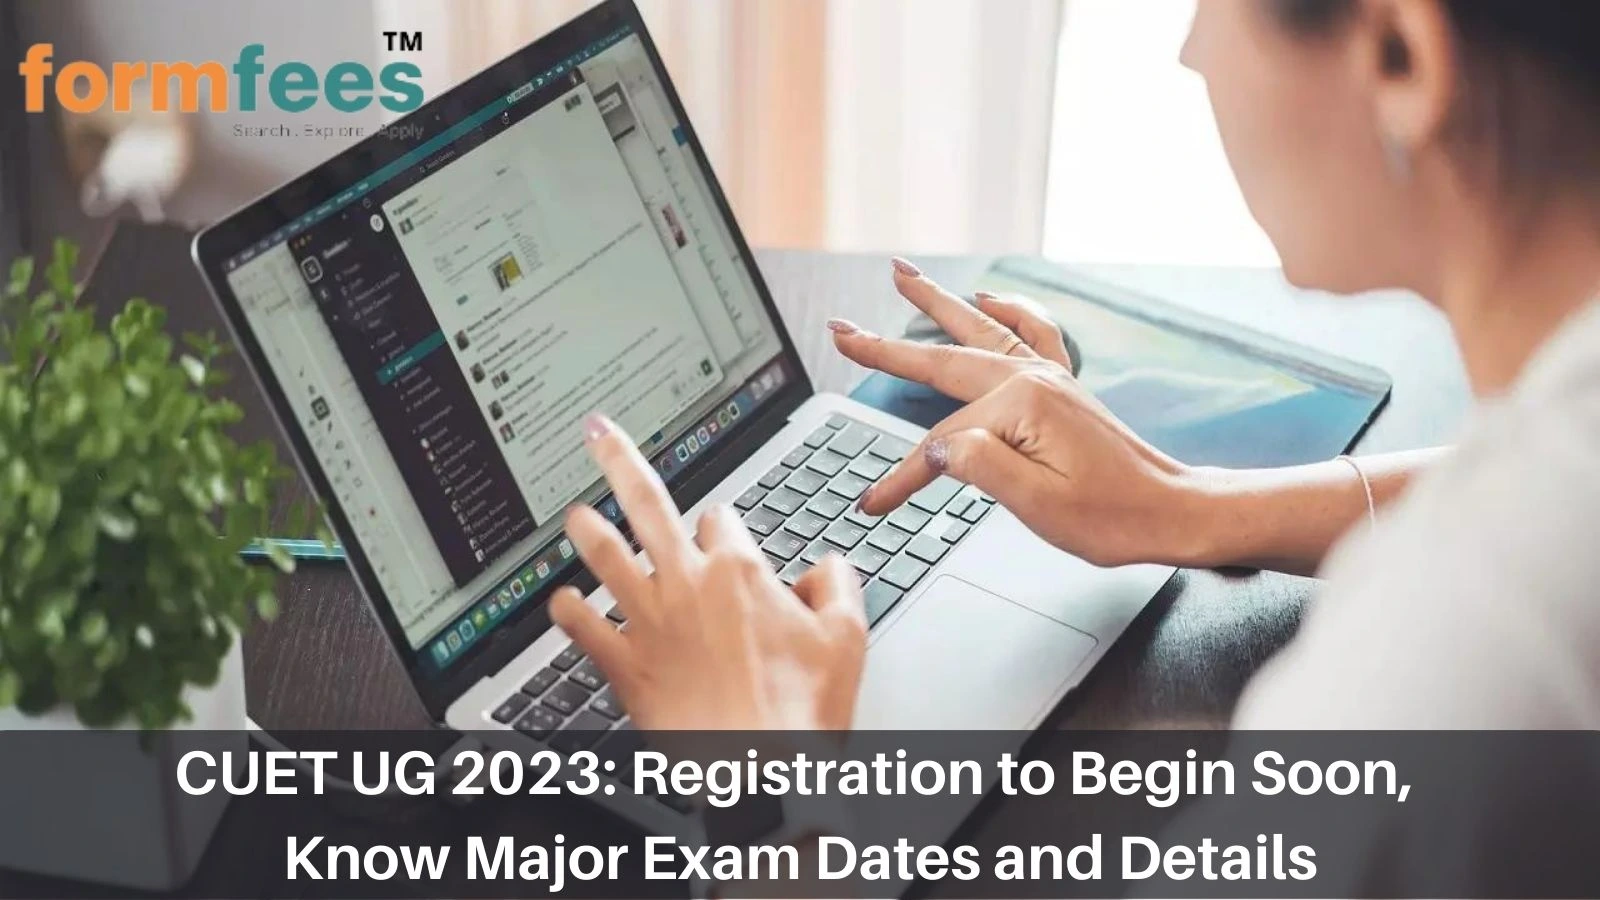 CUET UG 2023: Registration to Begin Soon, Know Major Exam Dates and Details